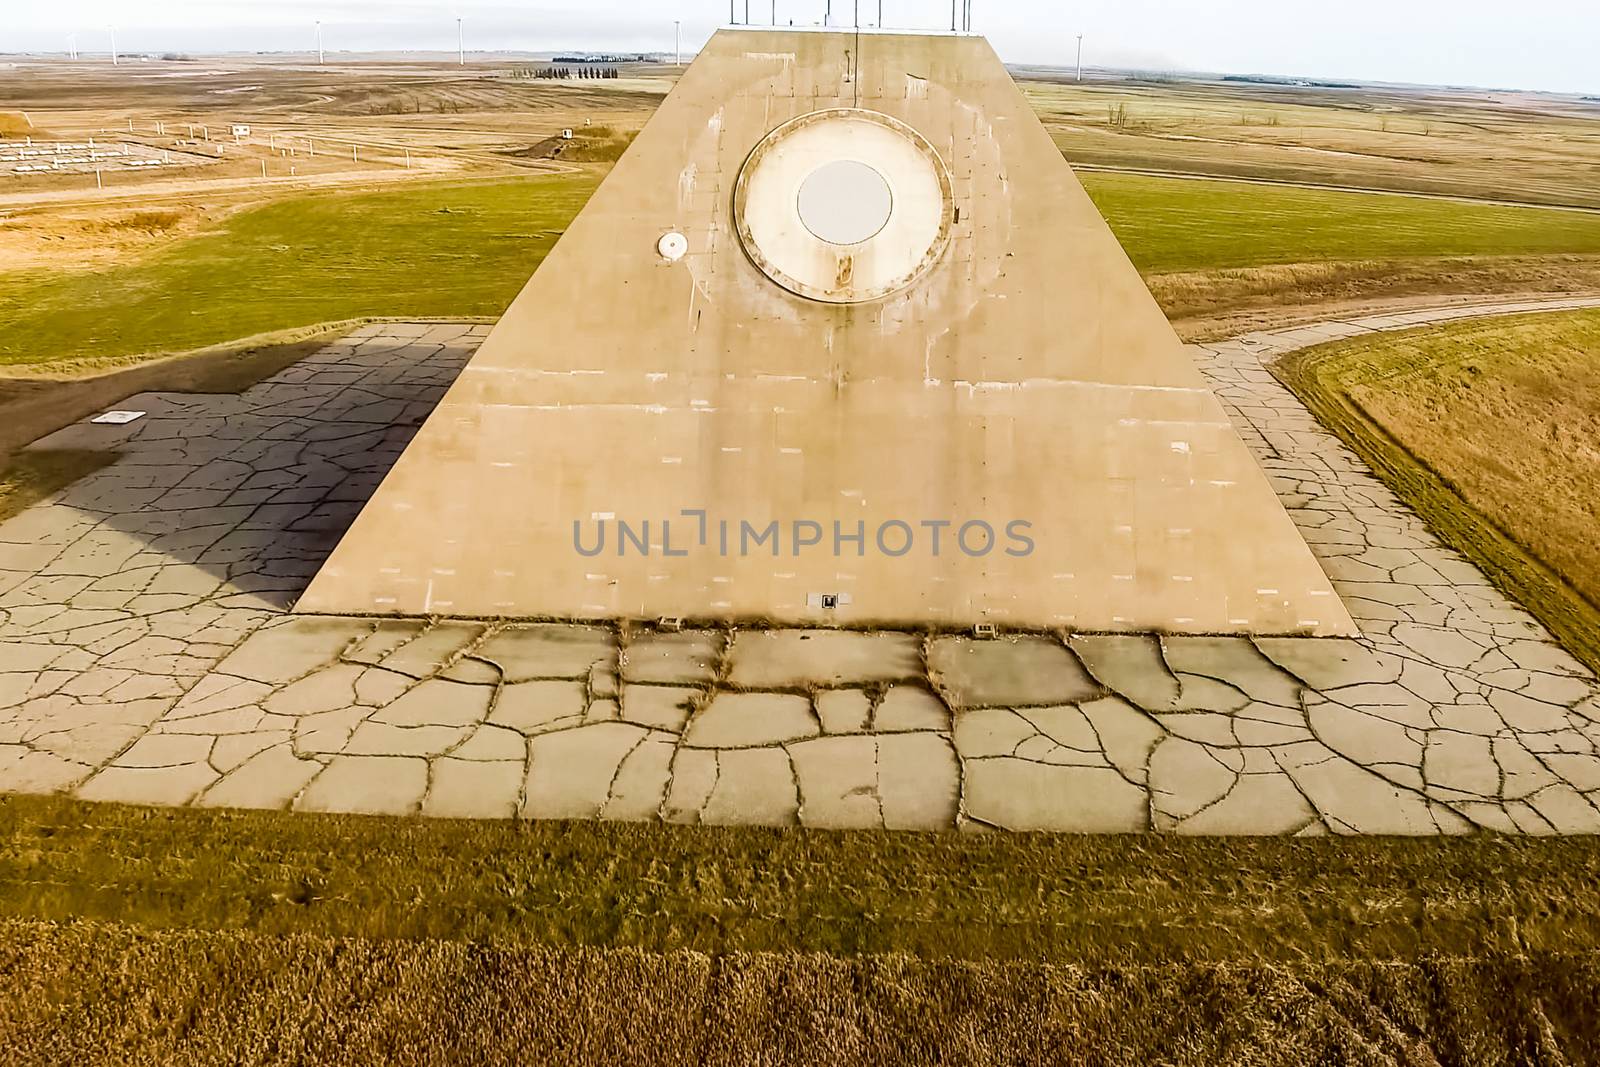 The building of the radio radar in the form of a pyramid on military base. Missile Site Radar Pyramid in Nekoma North Dakota. by nyrok